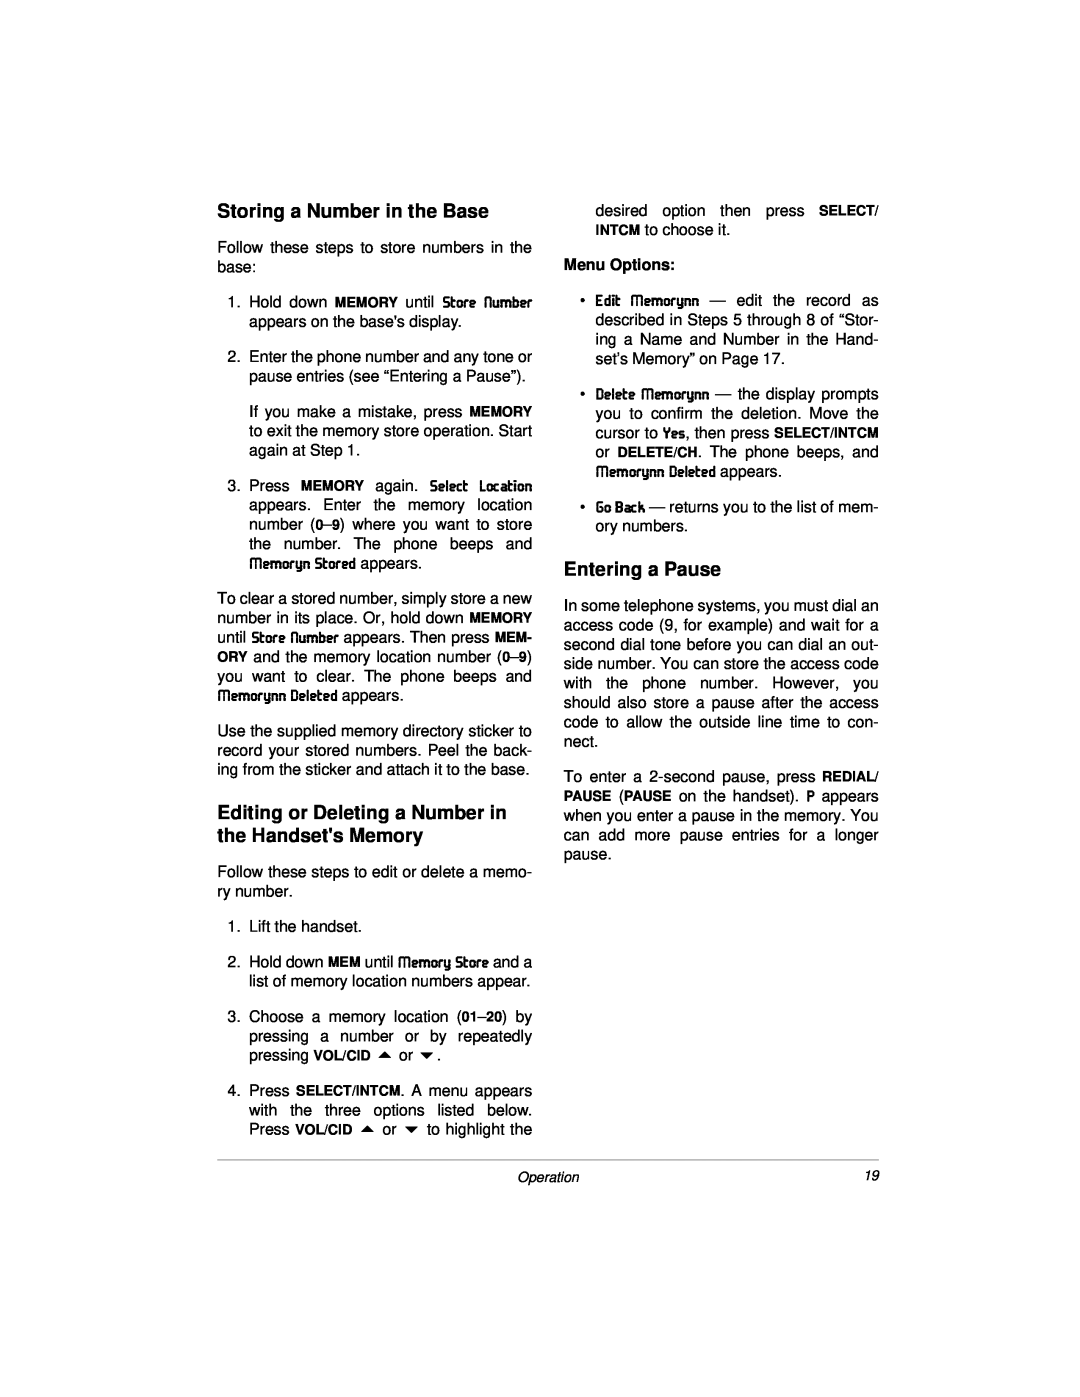 Radio Shack Dual Keypad owner manual Storing a Number in the Base, Editing or Deleting a Number in the Handsets Memory 